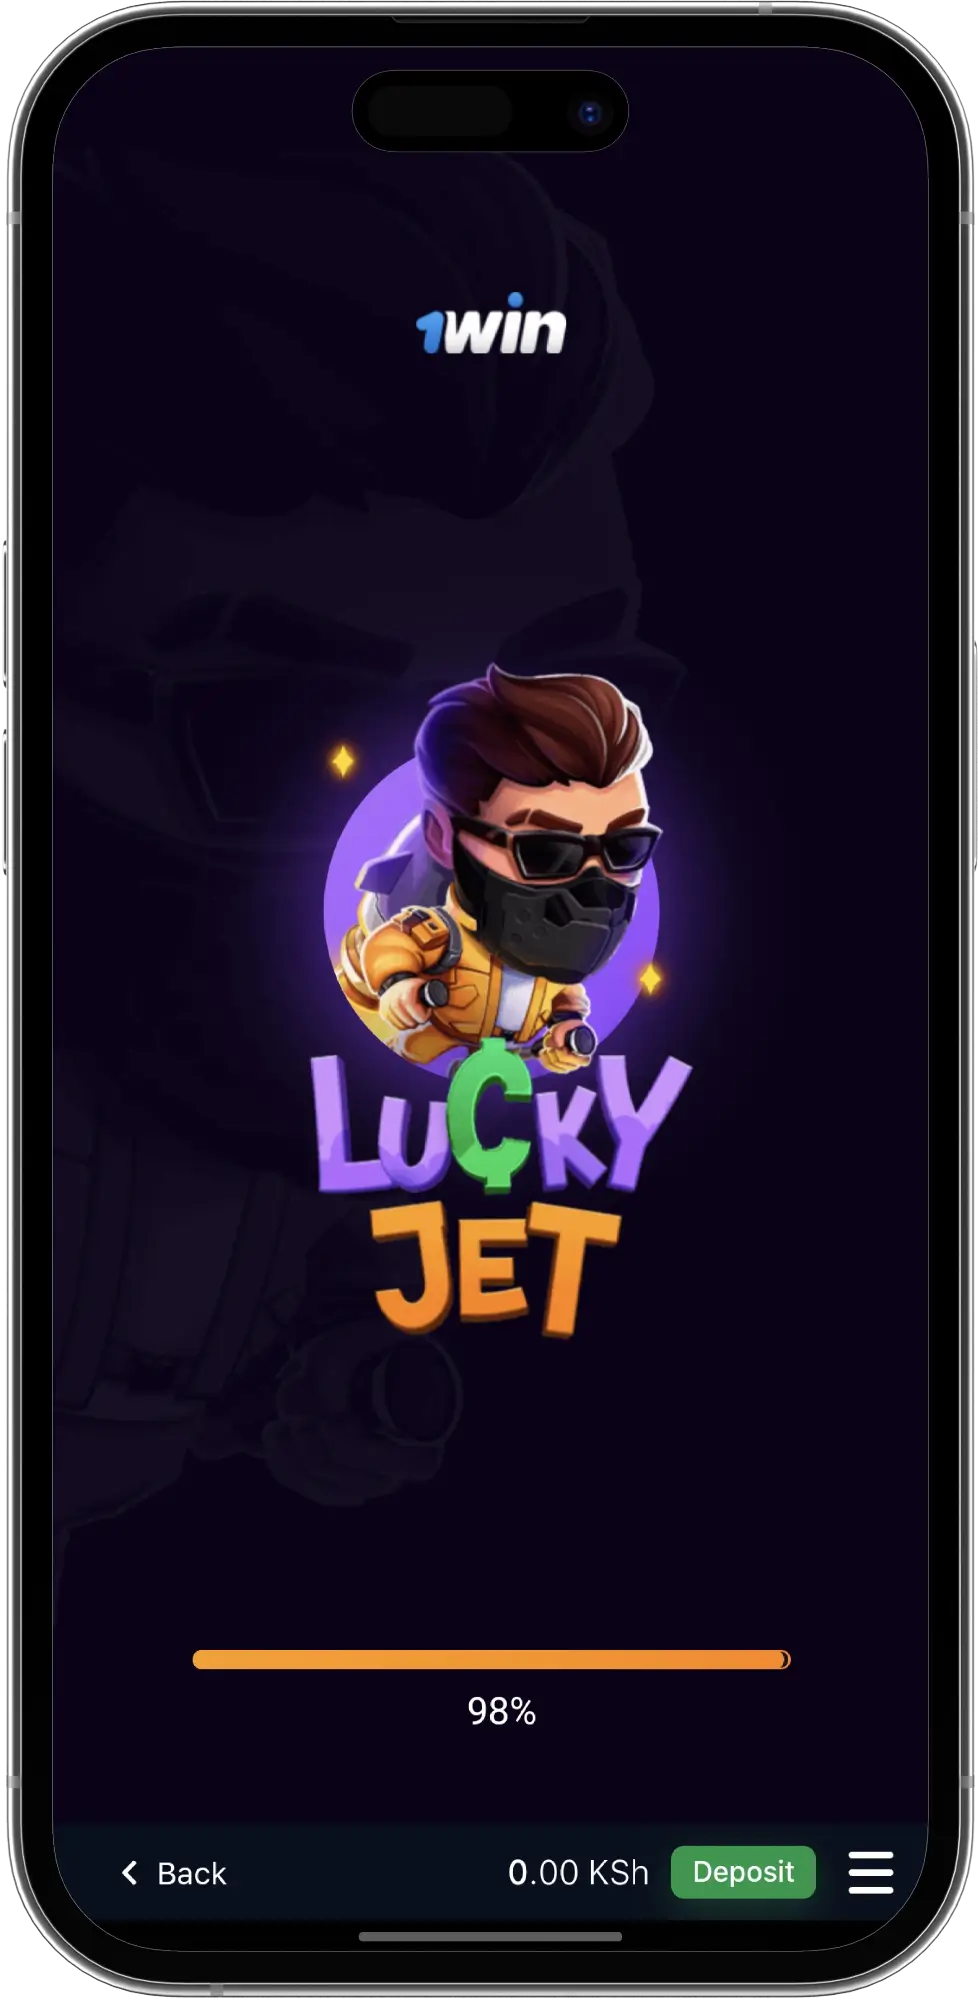 Lucky Jet players at 1win casino Kenya can see game loading progress